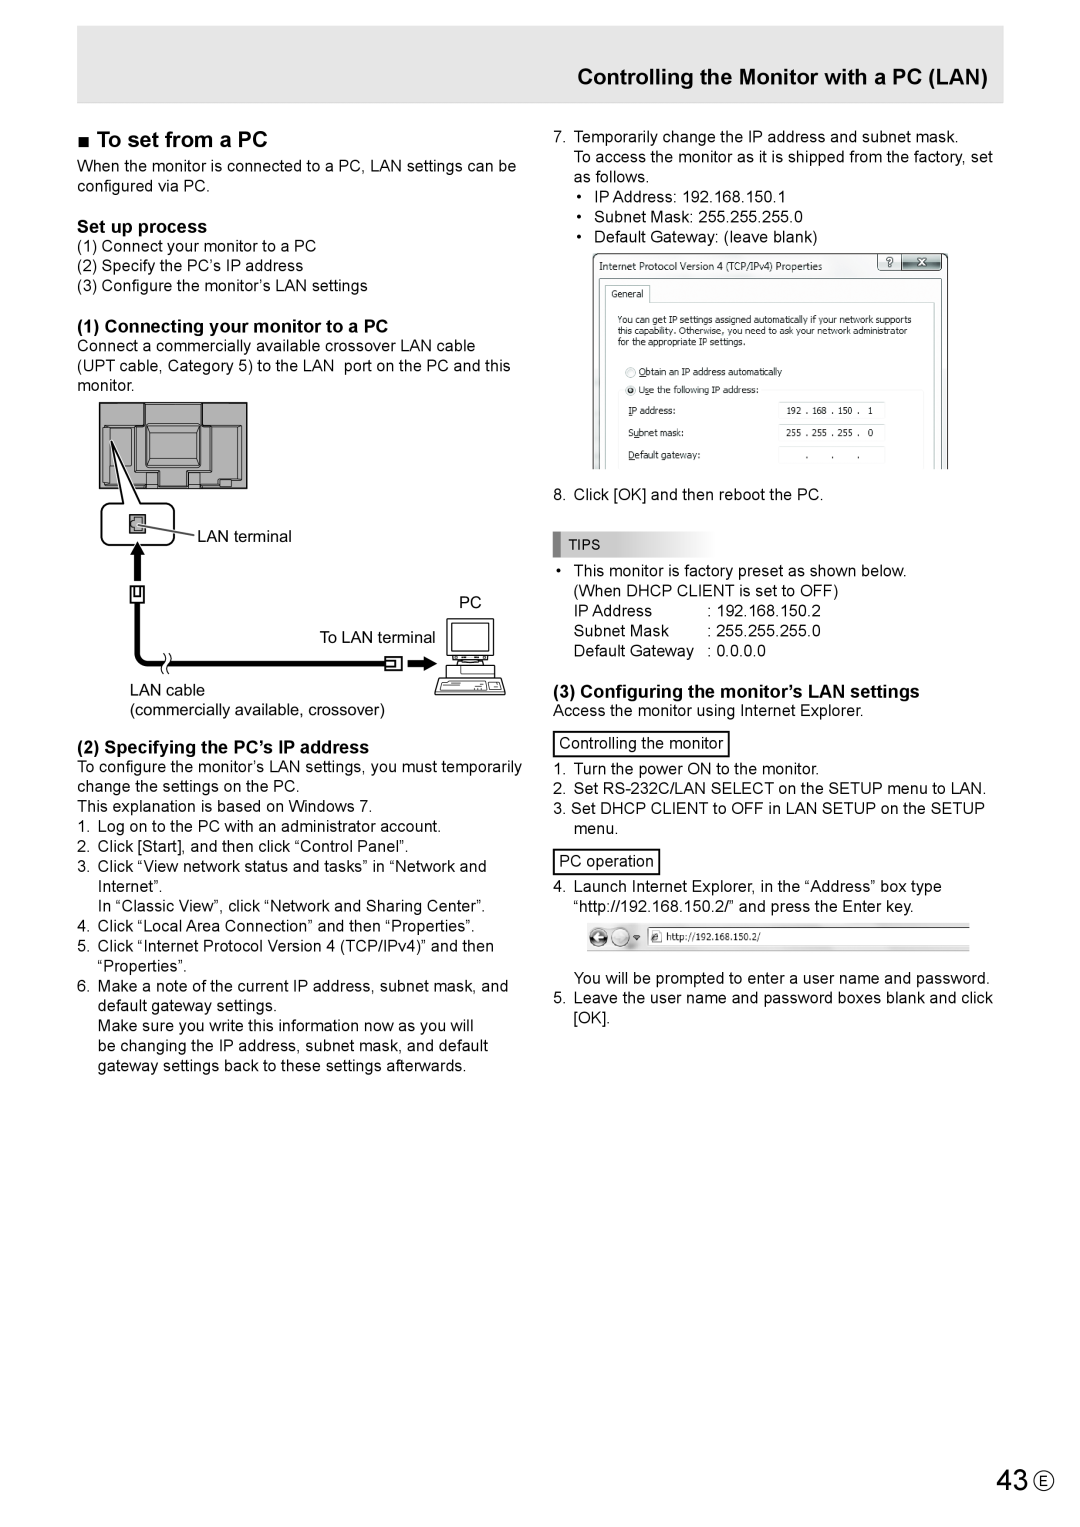 Sharp PN-E602 operation manual 43 E, To set from a PC, Controlling the Monitor with a PC LAN, Set up process 